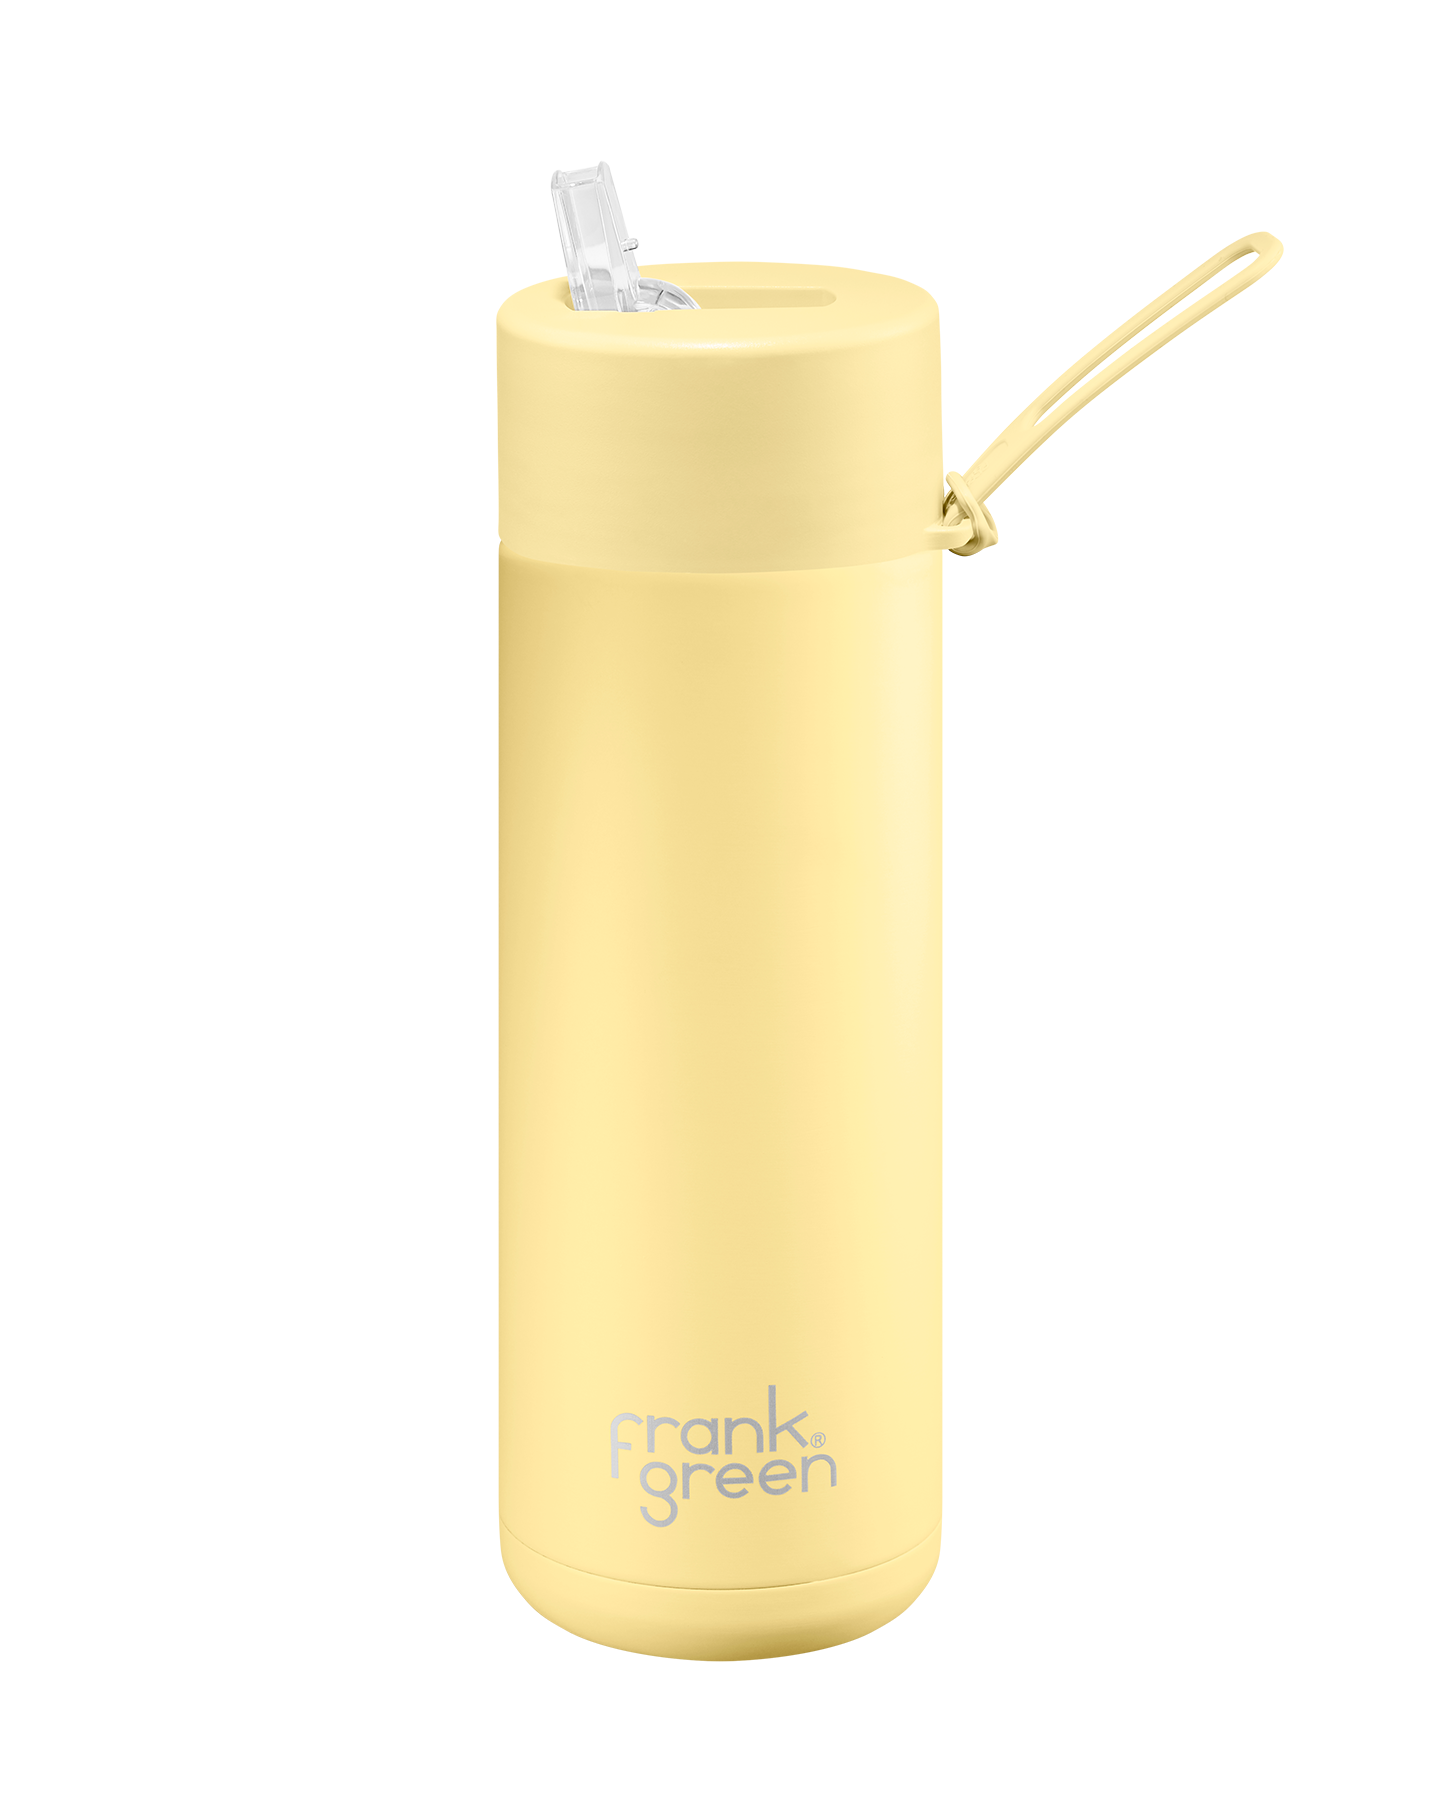 FRANK GREEN CERAMIC REUSABLE DRINK BOTTLE WITH STRAW LID 20OZ - BUTTERMILK YELLOW